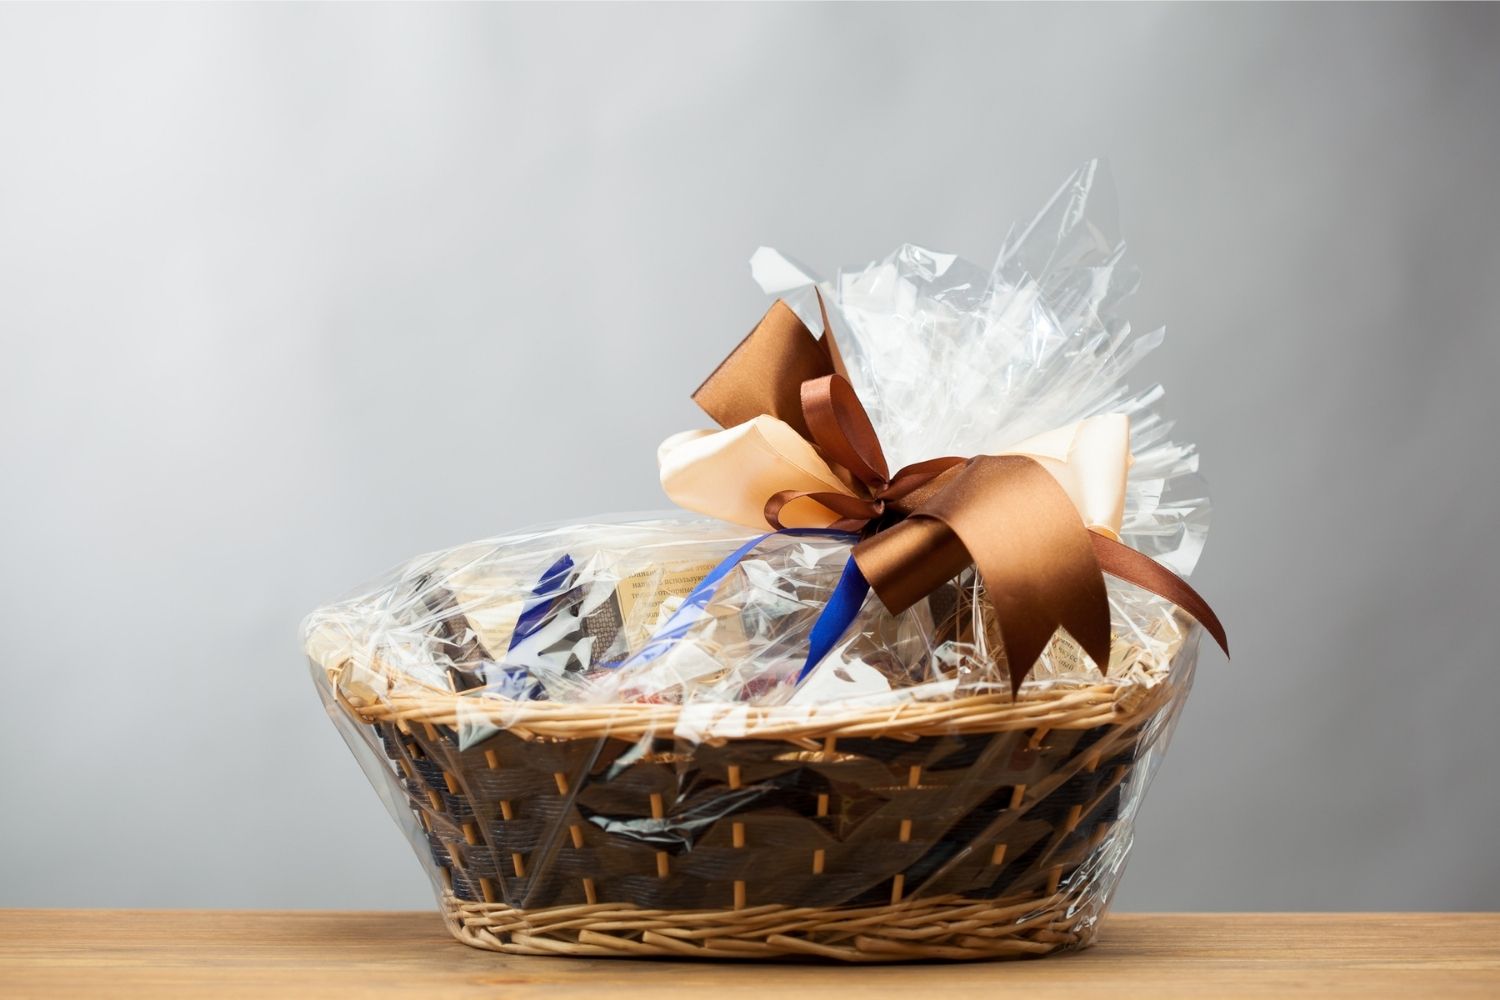 The Best Gift Baskets Option